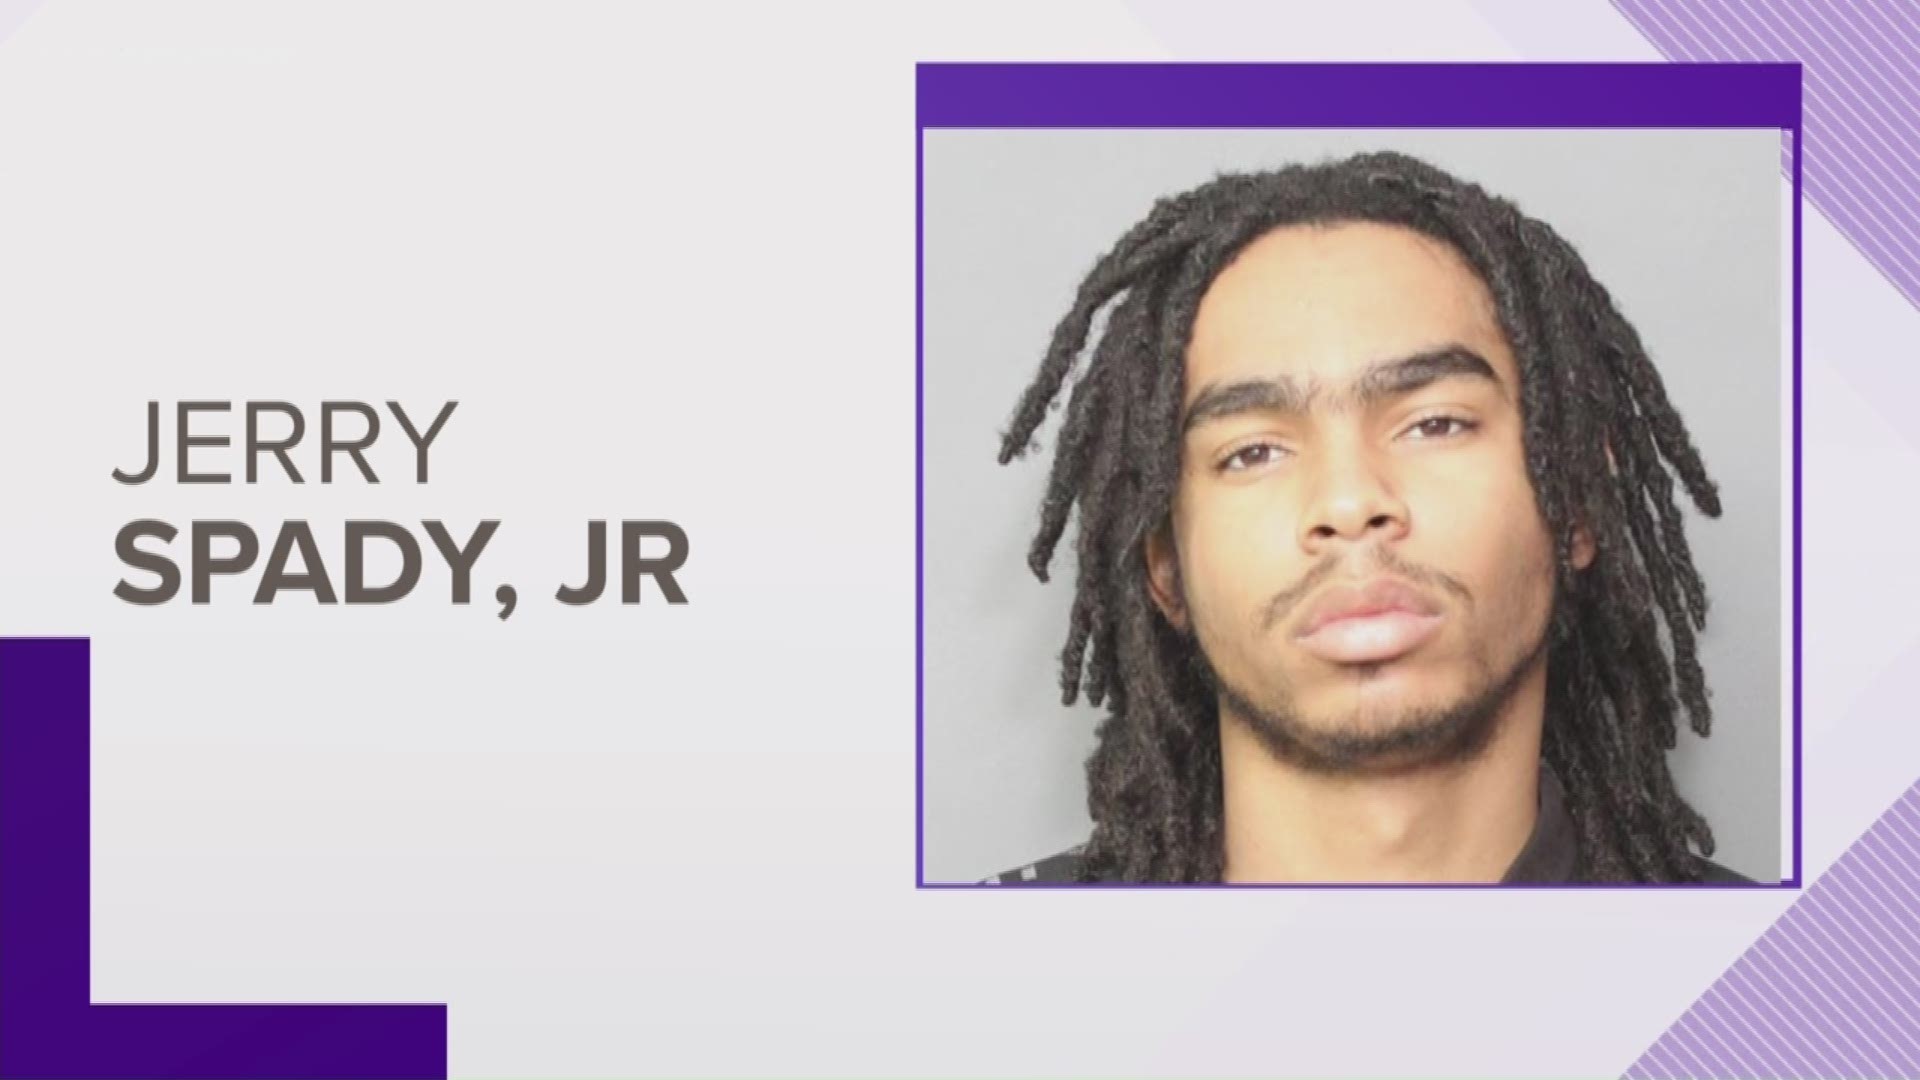 Jerry Spady, Jr. has been charged in connection with the shooting death of Nate Evans. Investigators haven't said exactly how Spady is connected to the shooting, but he is due back in court Friday.